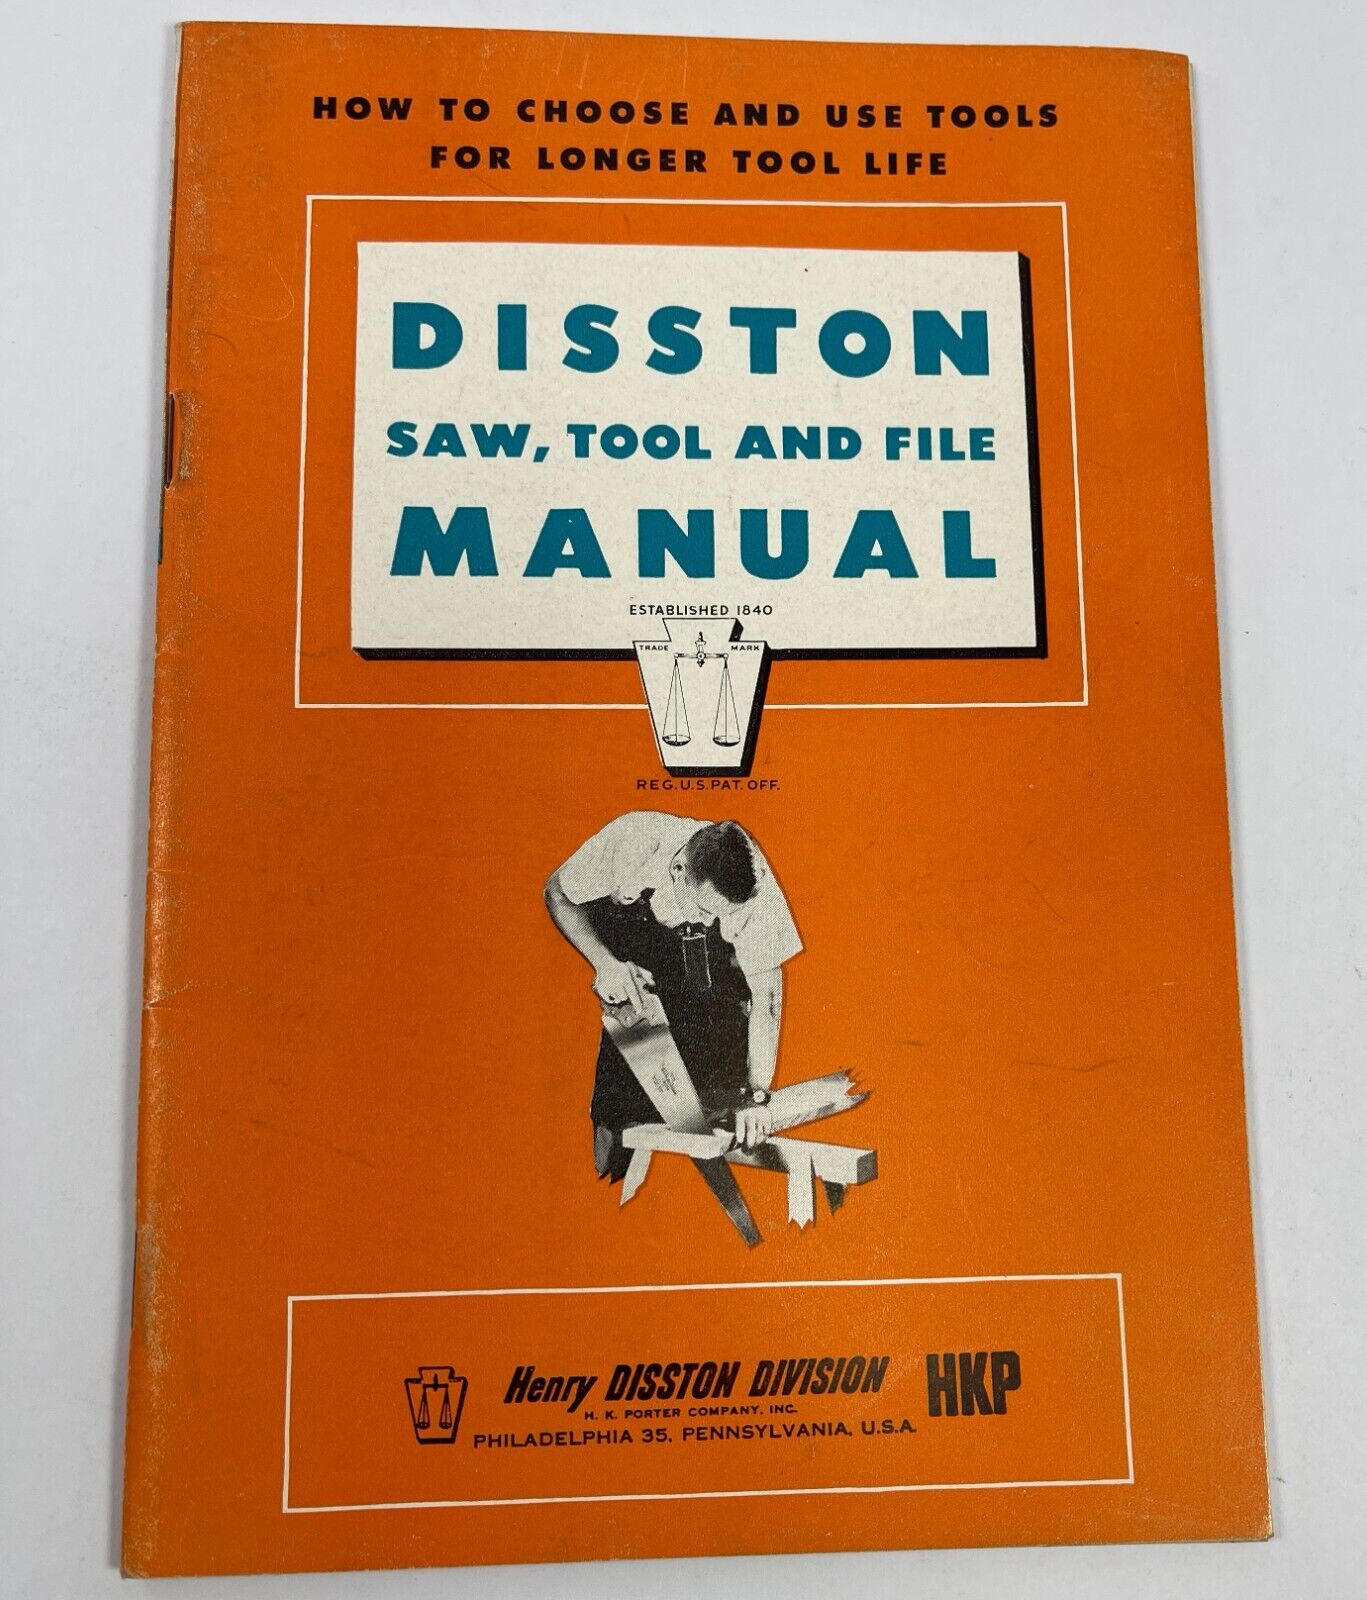 Disston Saw Tool and File Manual 1955 63 Page Catalog HKP Henry Disston